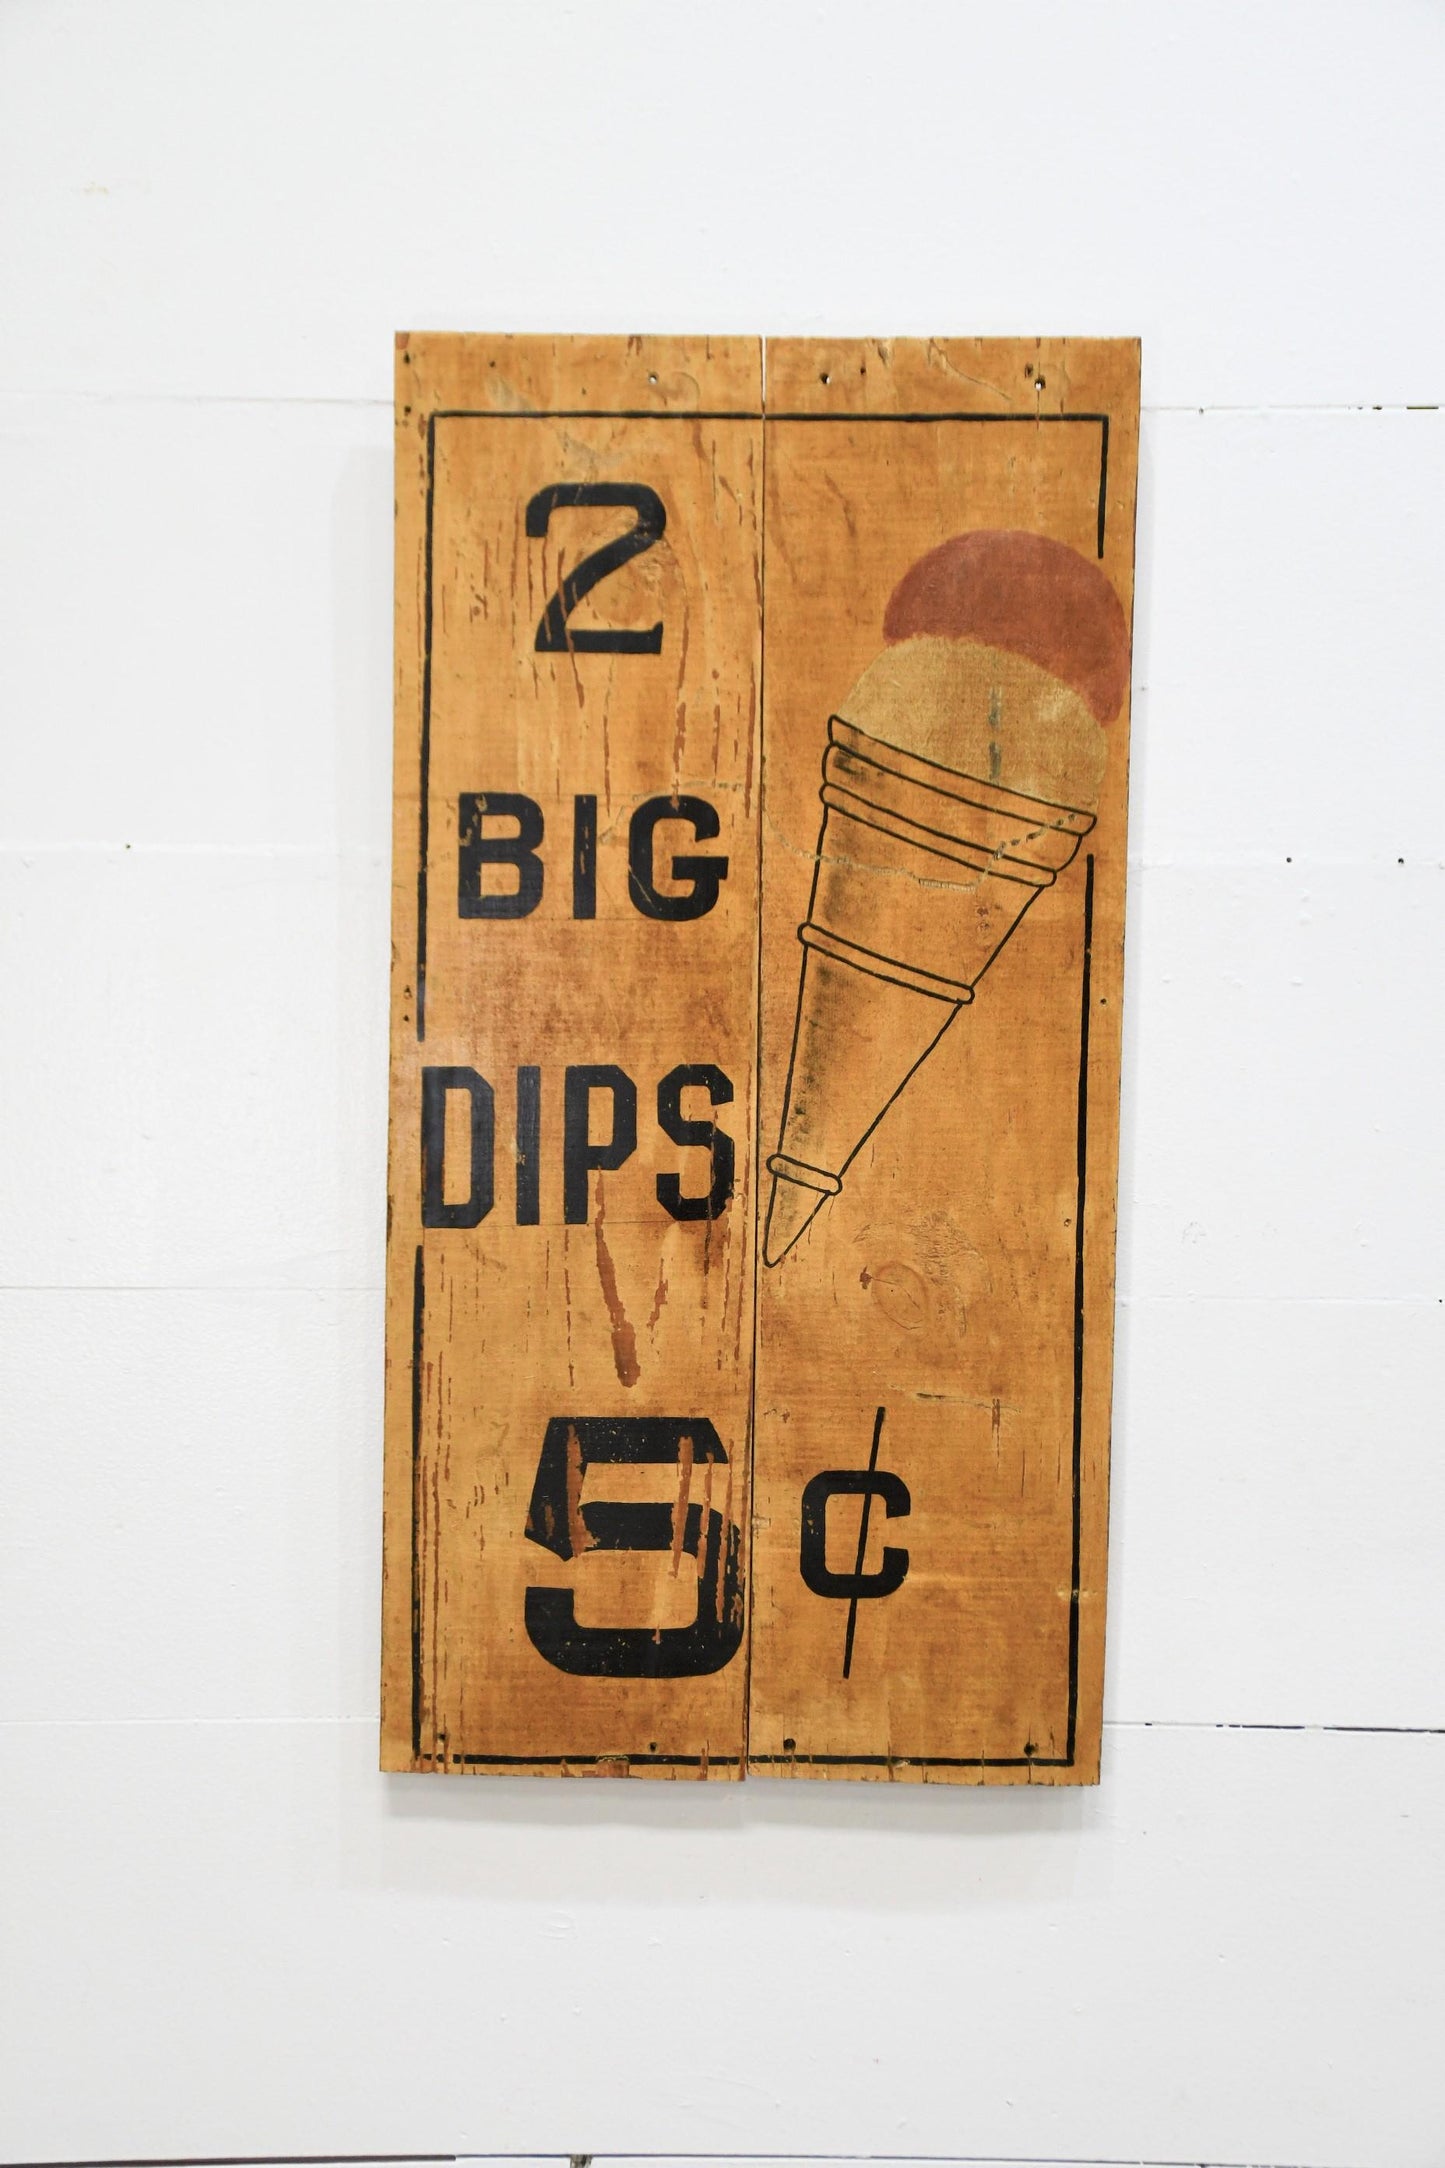 Wooden Ice Cream Sign "2 Big Dips 5 Cents"